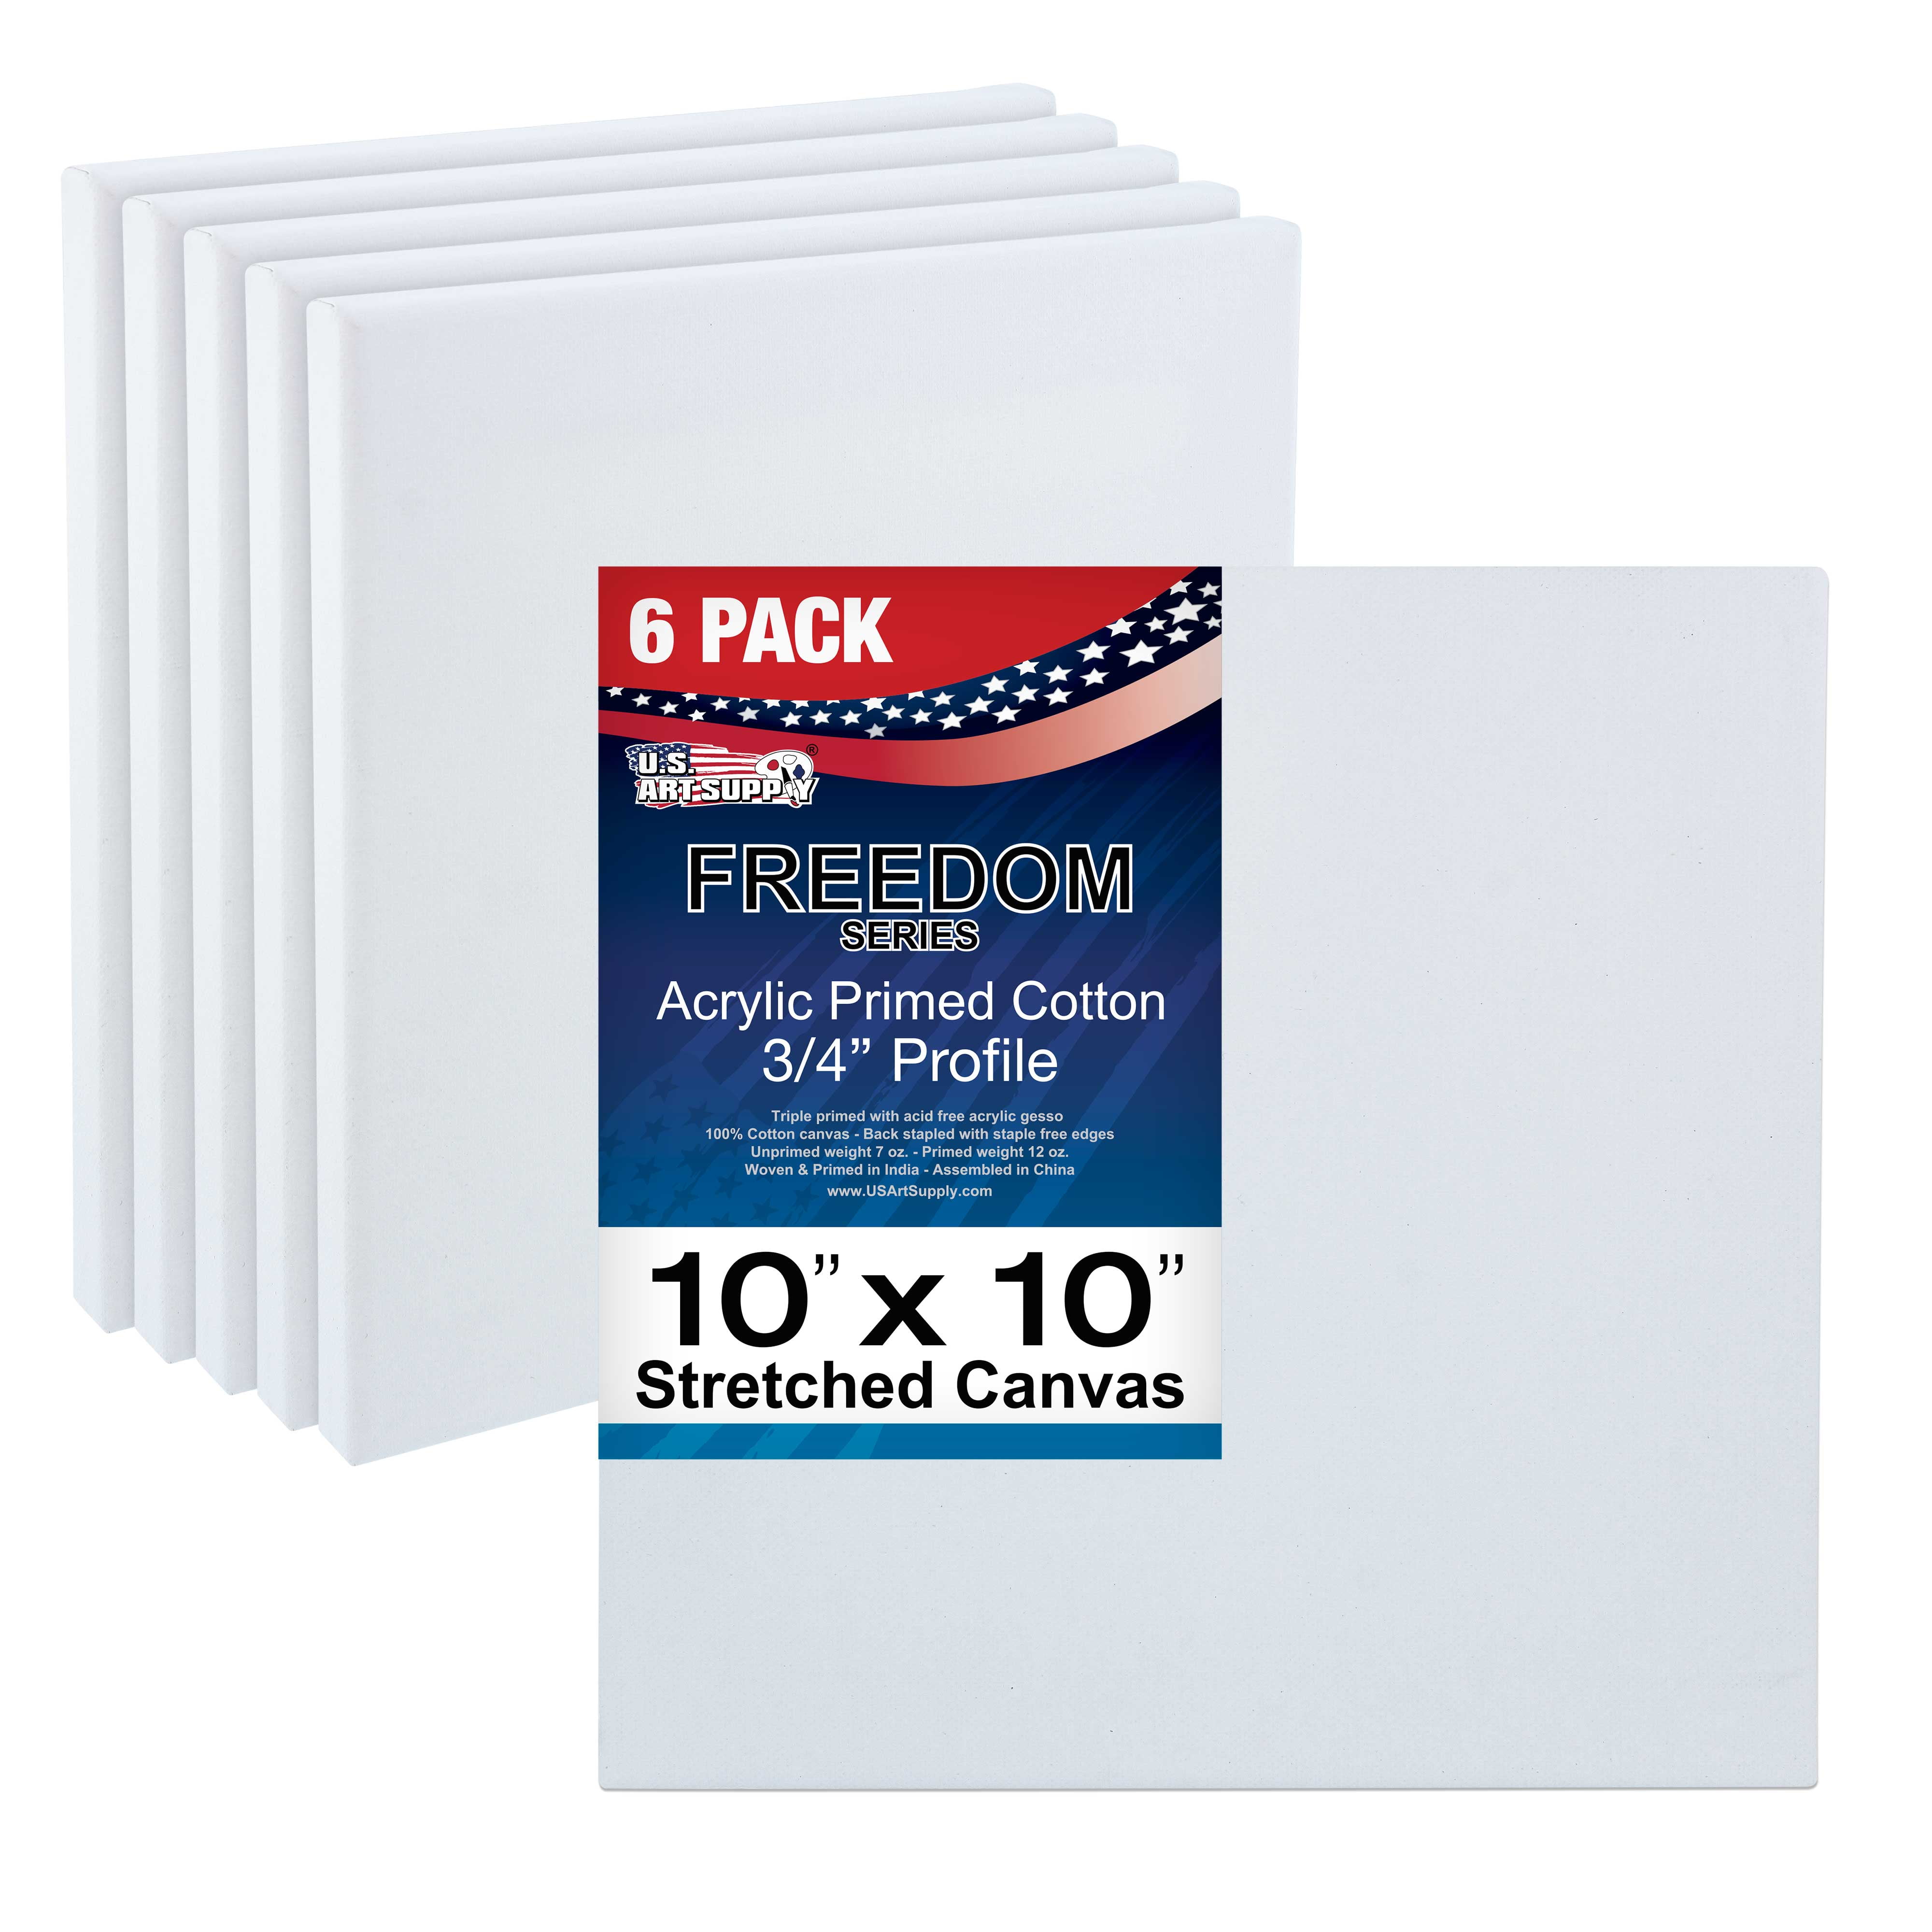 primed 10 ART-STAR STRETCHED CANVASES~8x8" 100 % cottonstretcher bars 